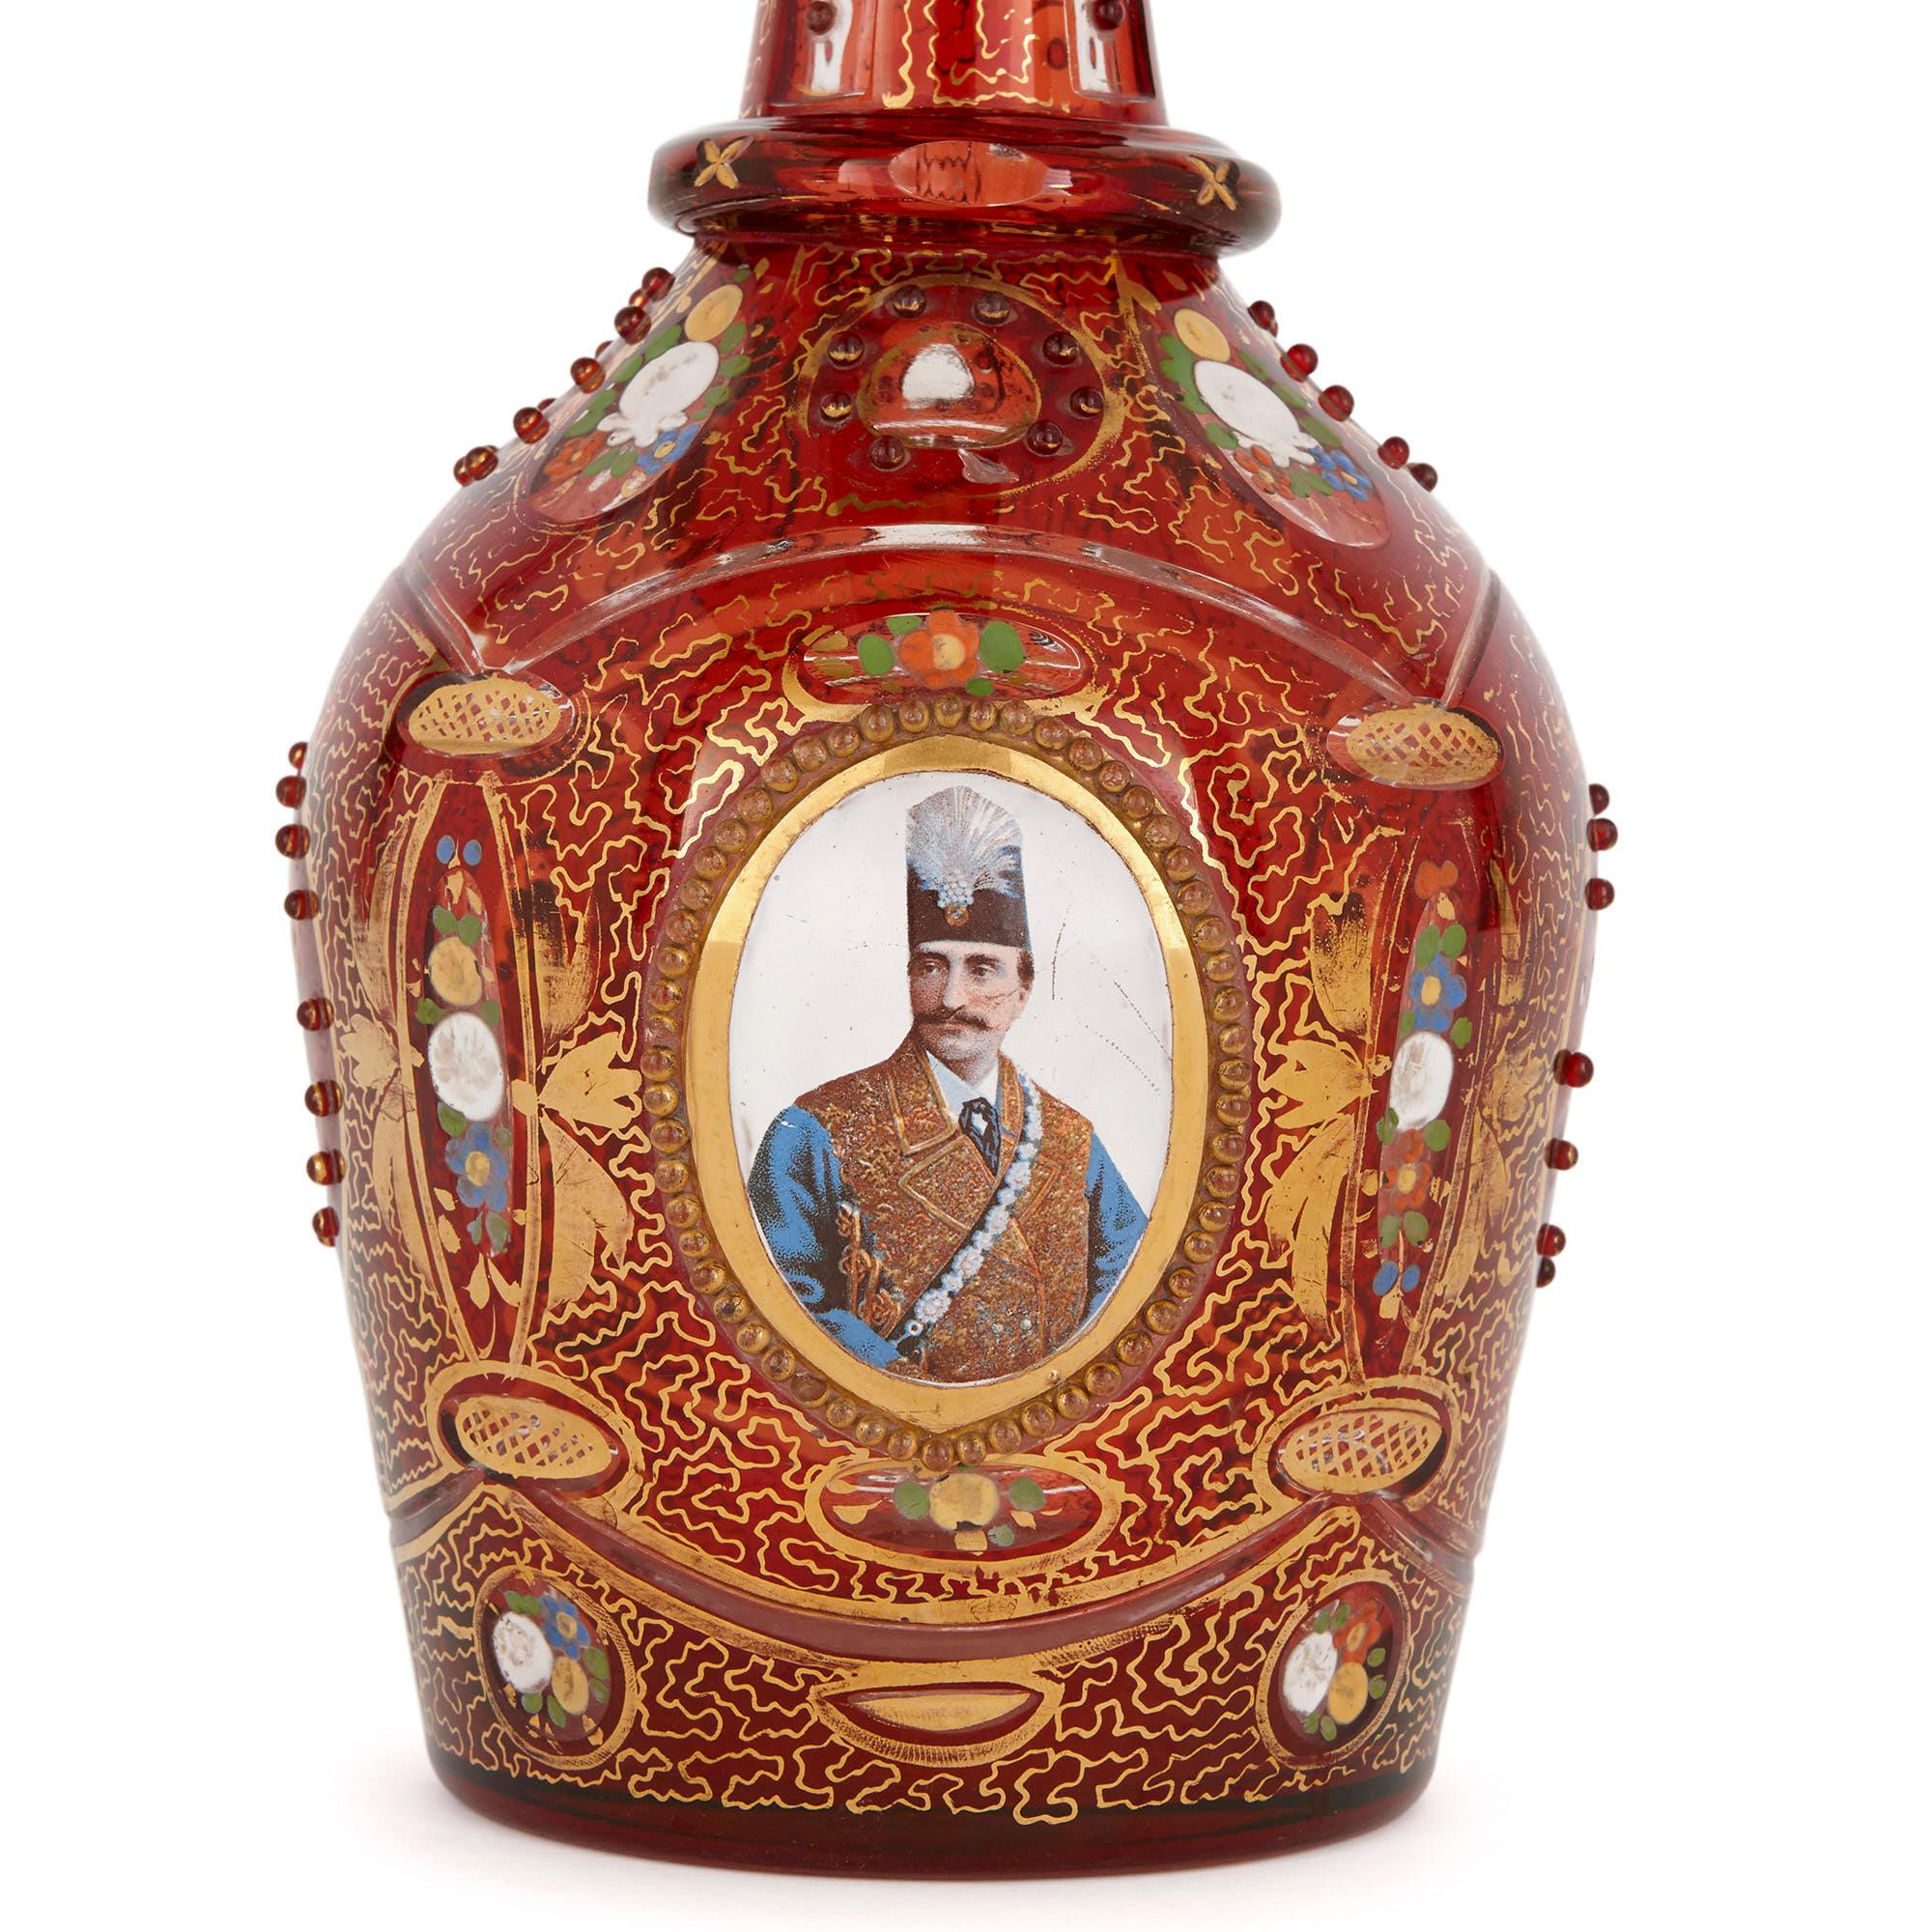 This exquisite ruby glass decanter was crafted in the late 19th century in Bohemia, a historic region which was famous for its glassware. Antique Bohemian glass is today considered highly collectable because of its high-quality craftsmanship and